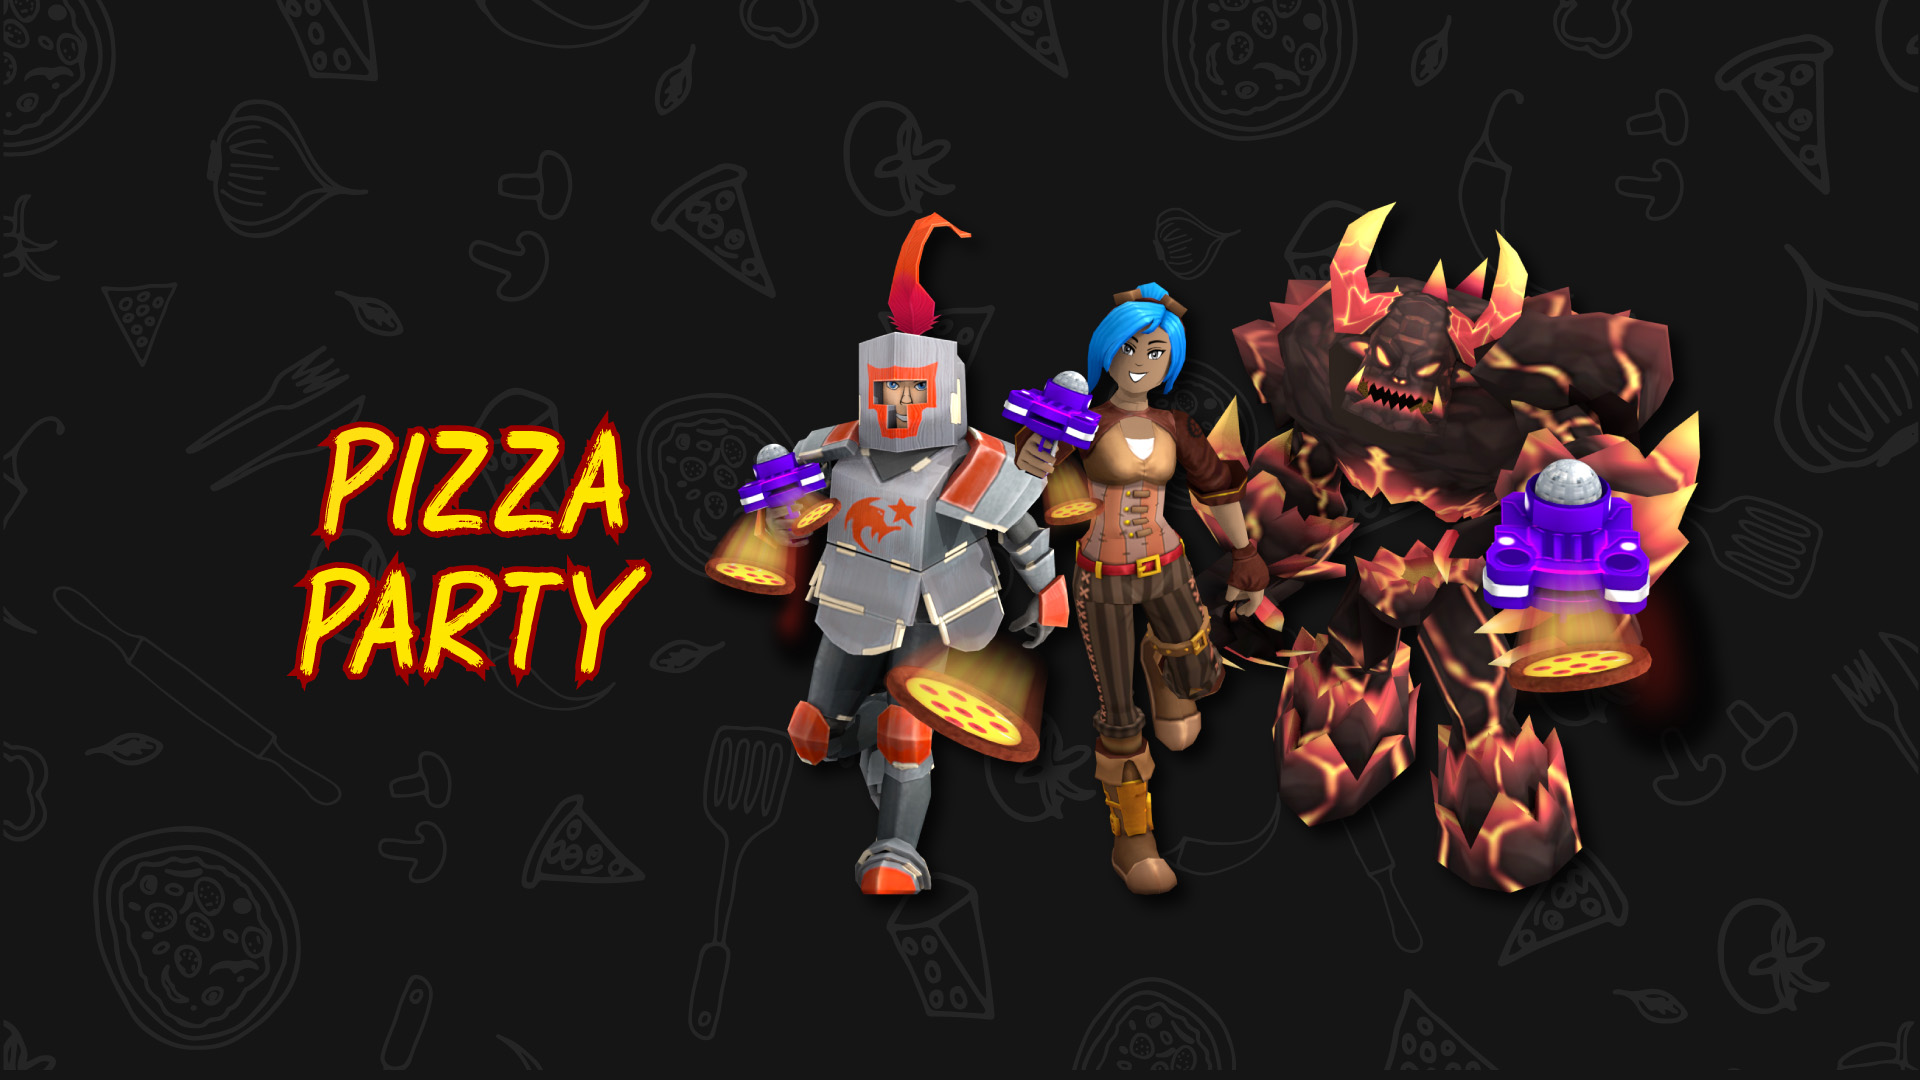 Pizza Party Event Work At A Pizza Place Wiki Fandom - 